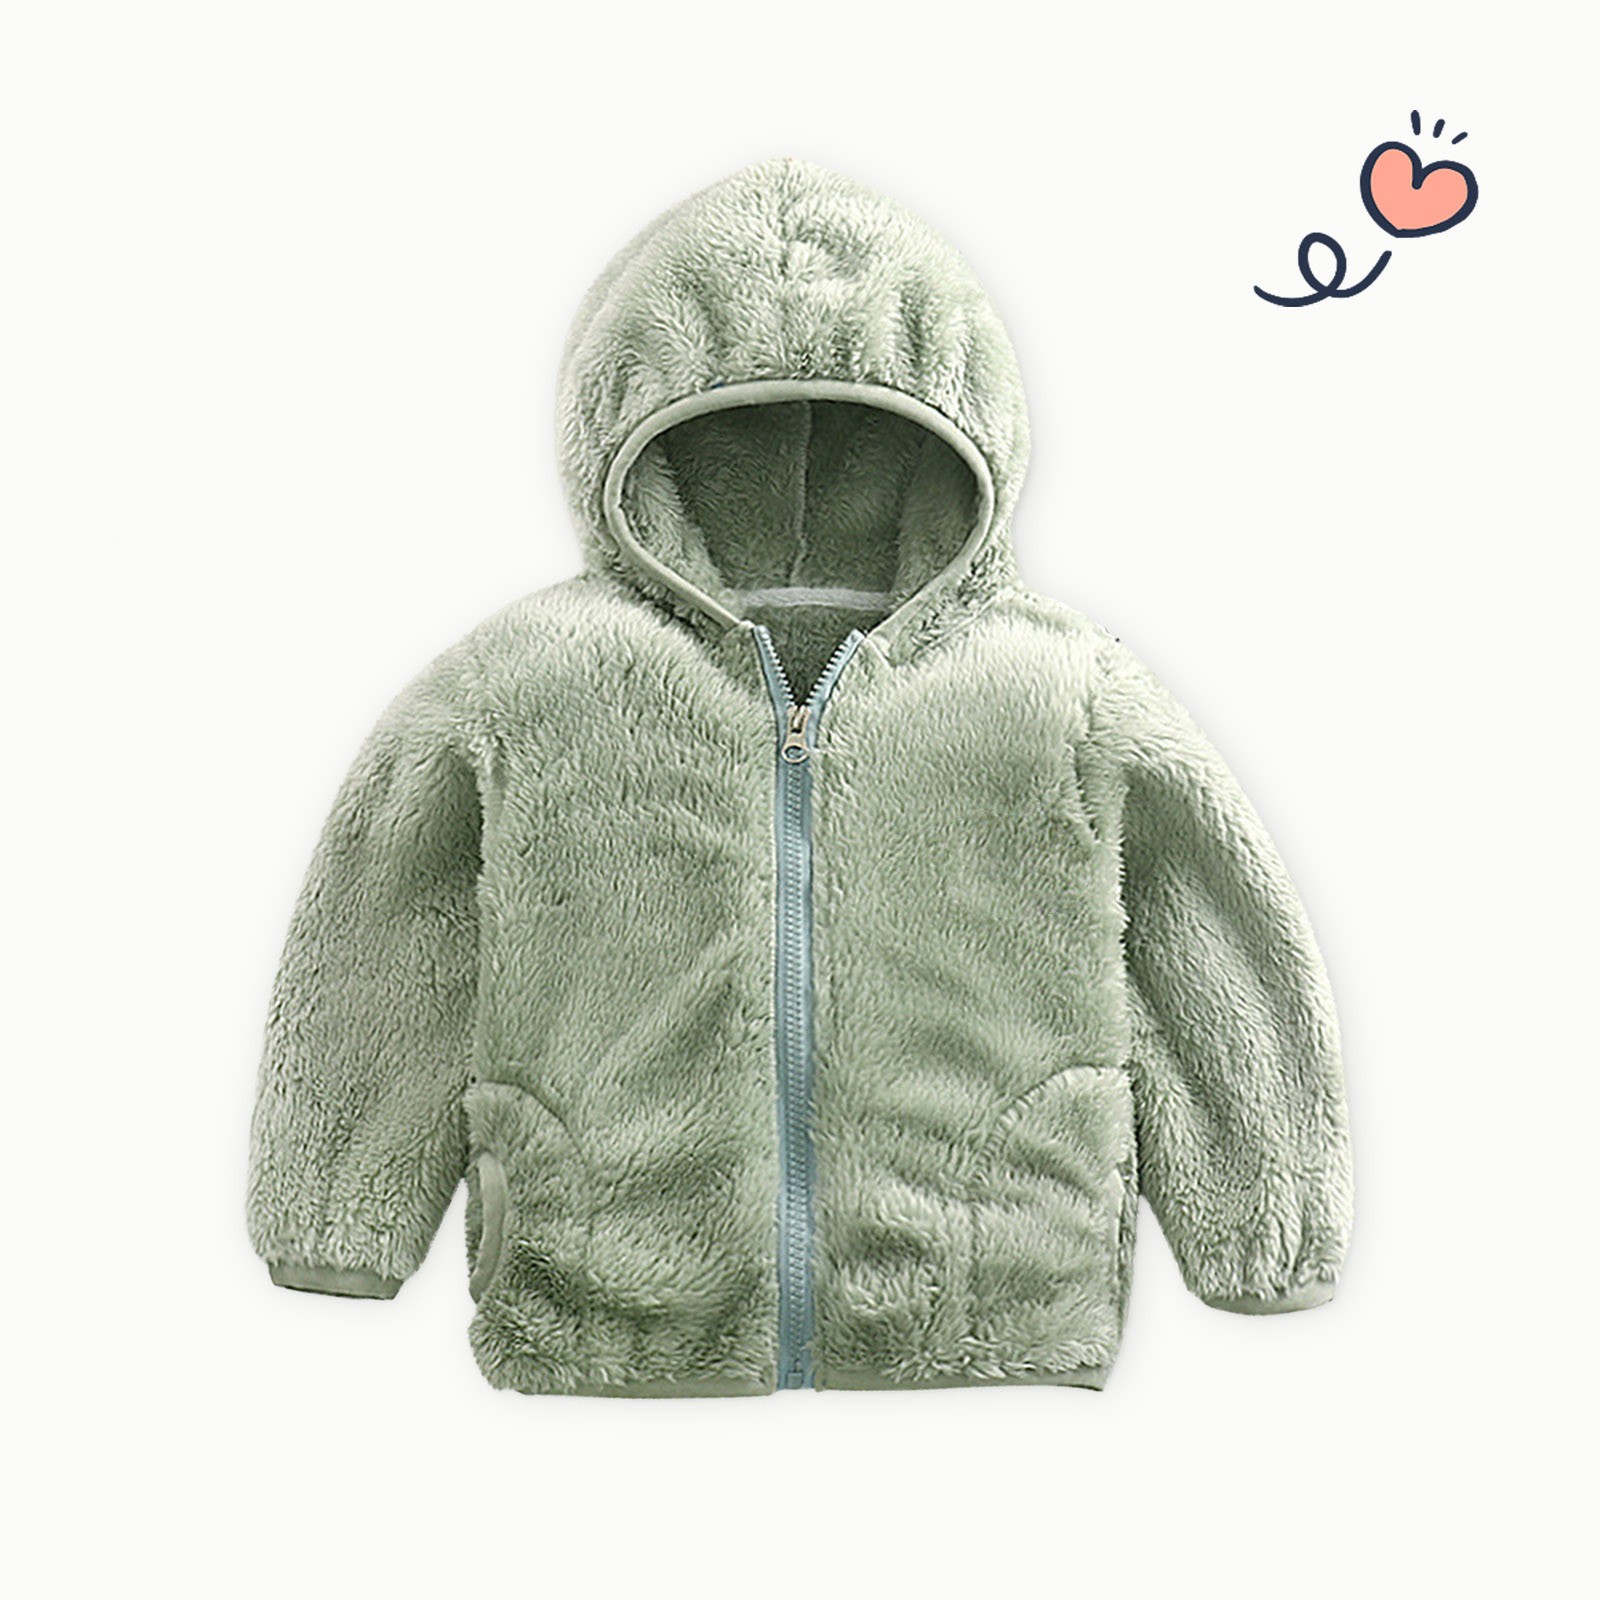 Dezsed Toddler Fleece Jacket Clearance Toddler Baby Boys Girls Solid Color Plush Cute Winter Keep Warm Hoodie Coat Jacket 6-7 Years Green - image 4 of 6